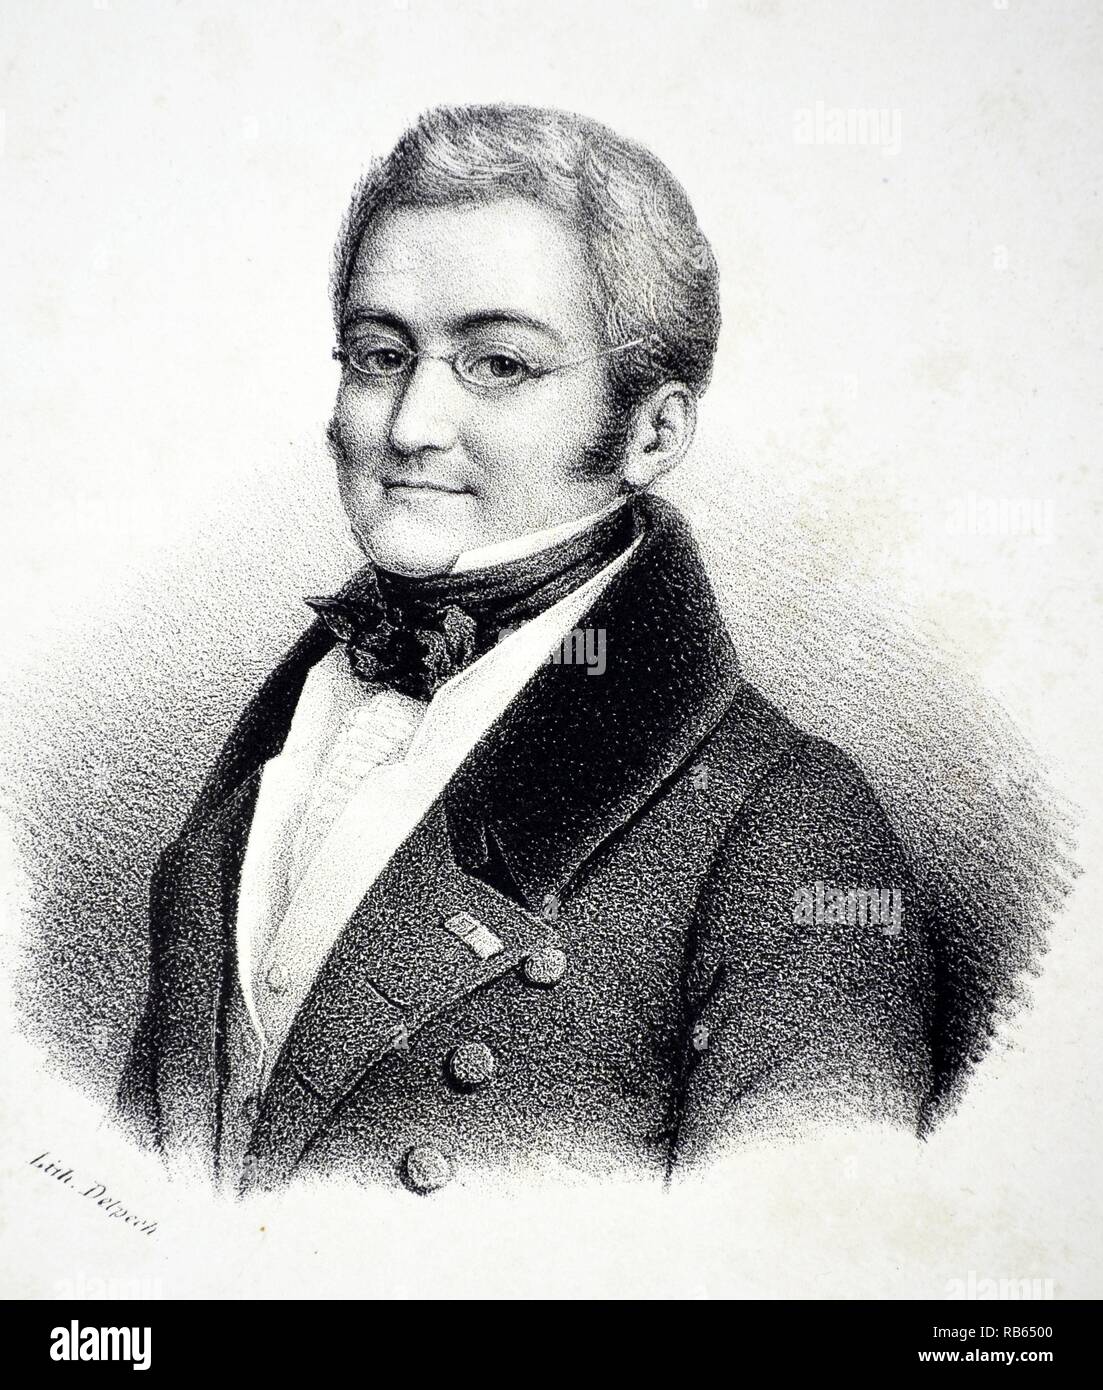 (Marie Joseph Louis) Adolphe Thiers (1797-1877) French politician and historian. Lithograph, Paris, c1840. Stock Photo